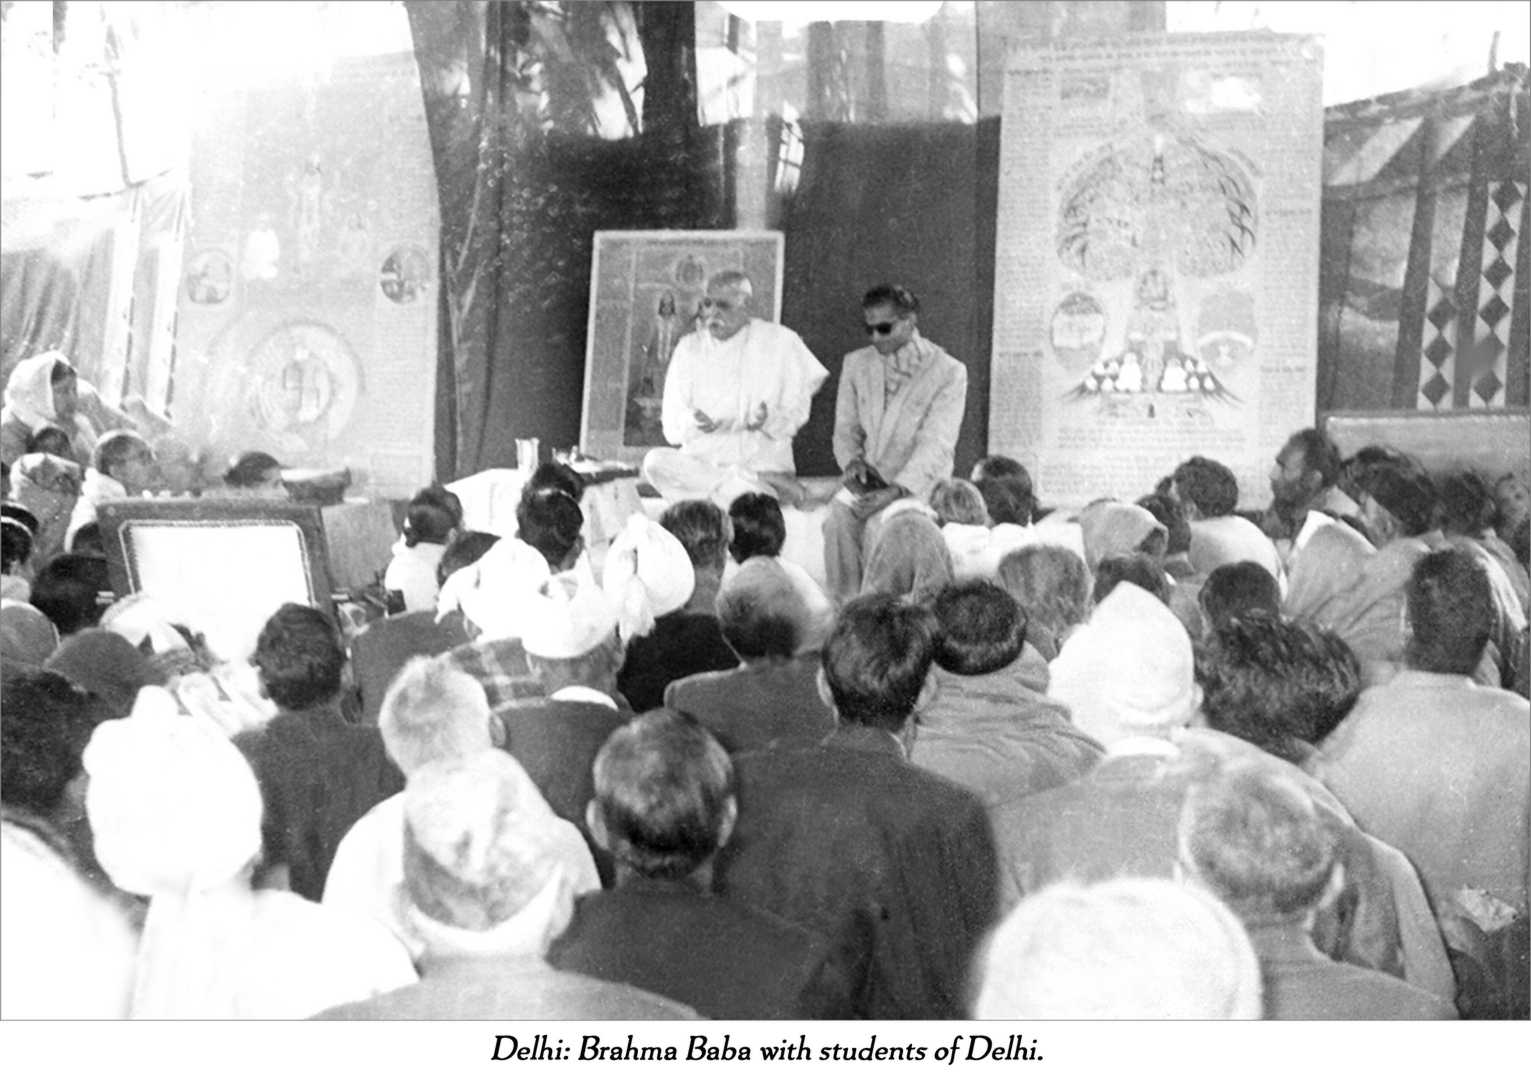 Brahma baba with students of delhi